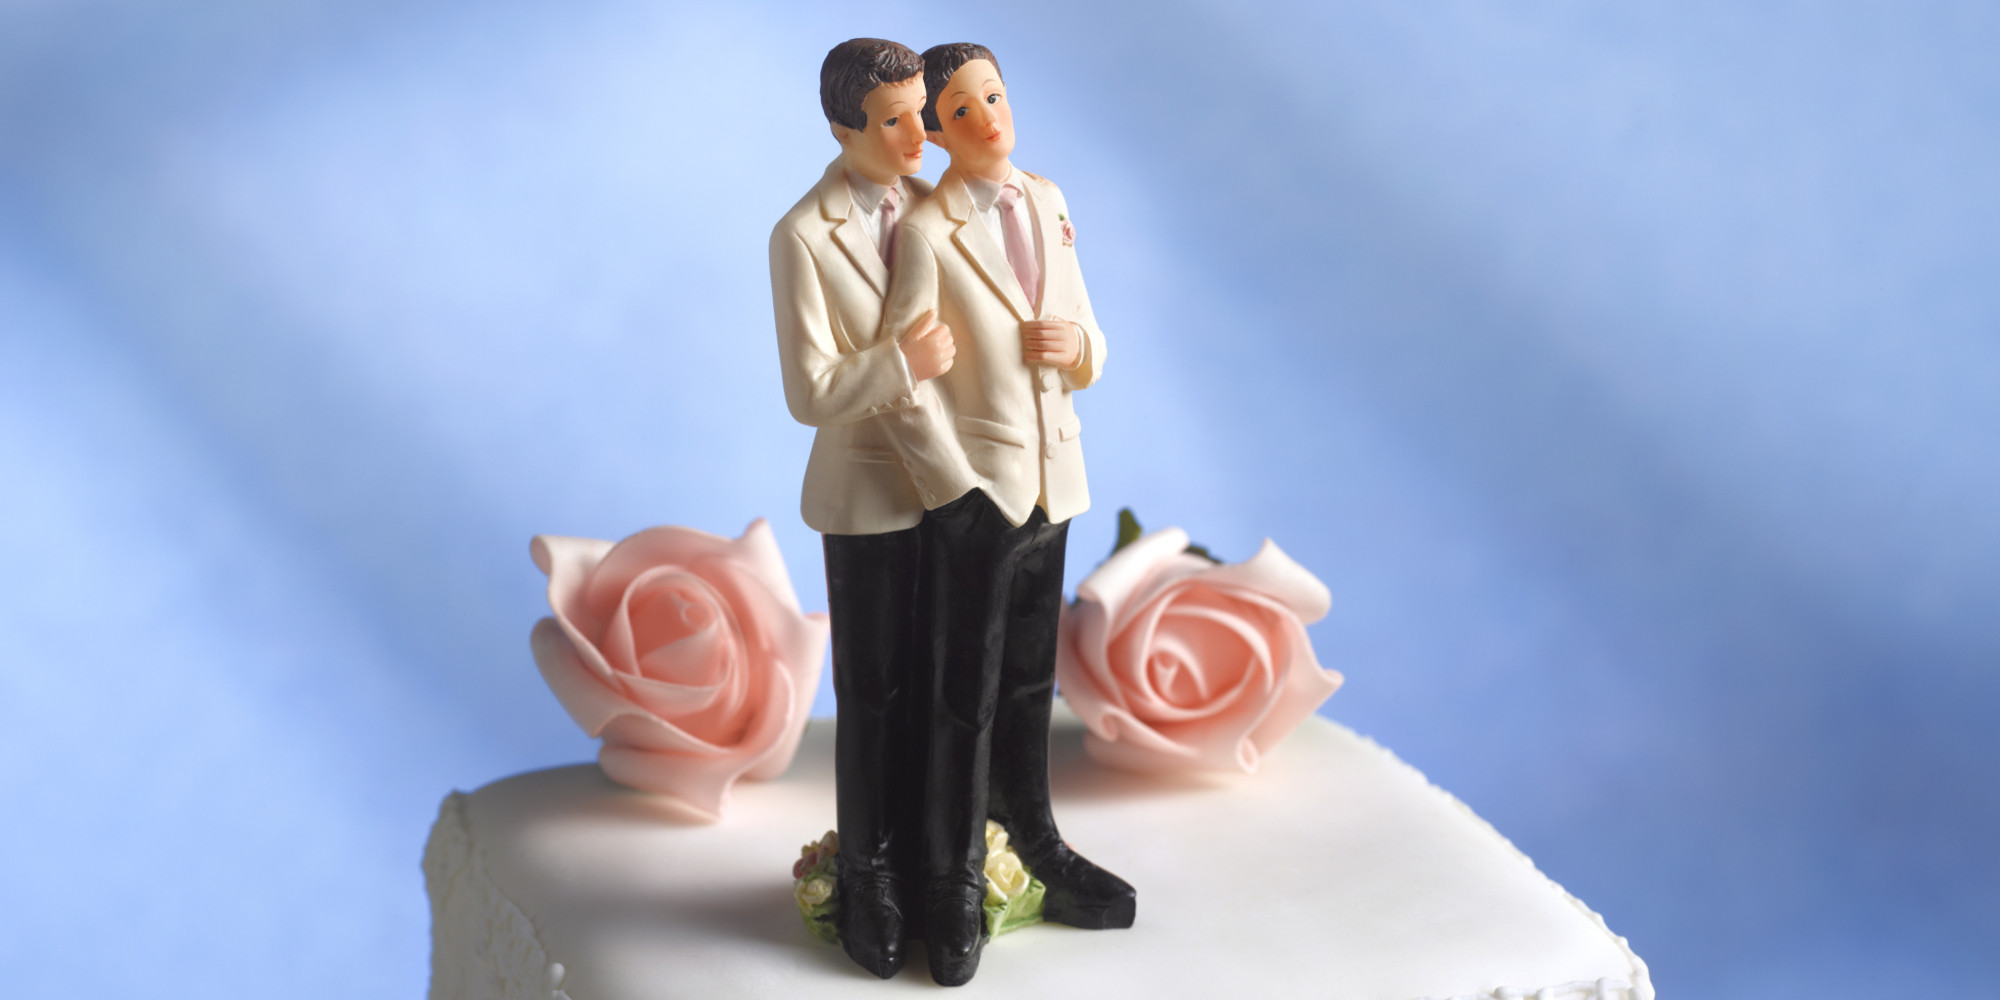 Requiring A Baker To Make A Gay Wedding Cake Is Like Forcing Blacks To